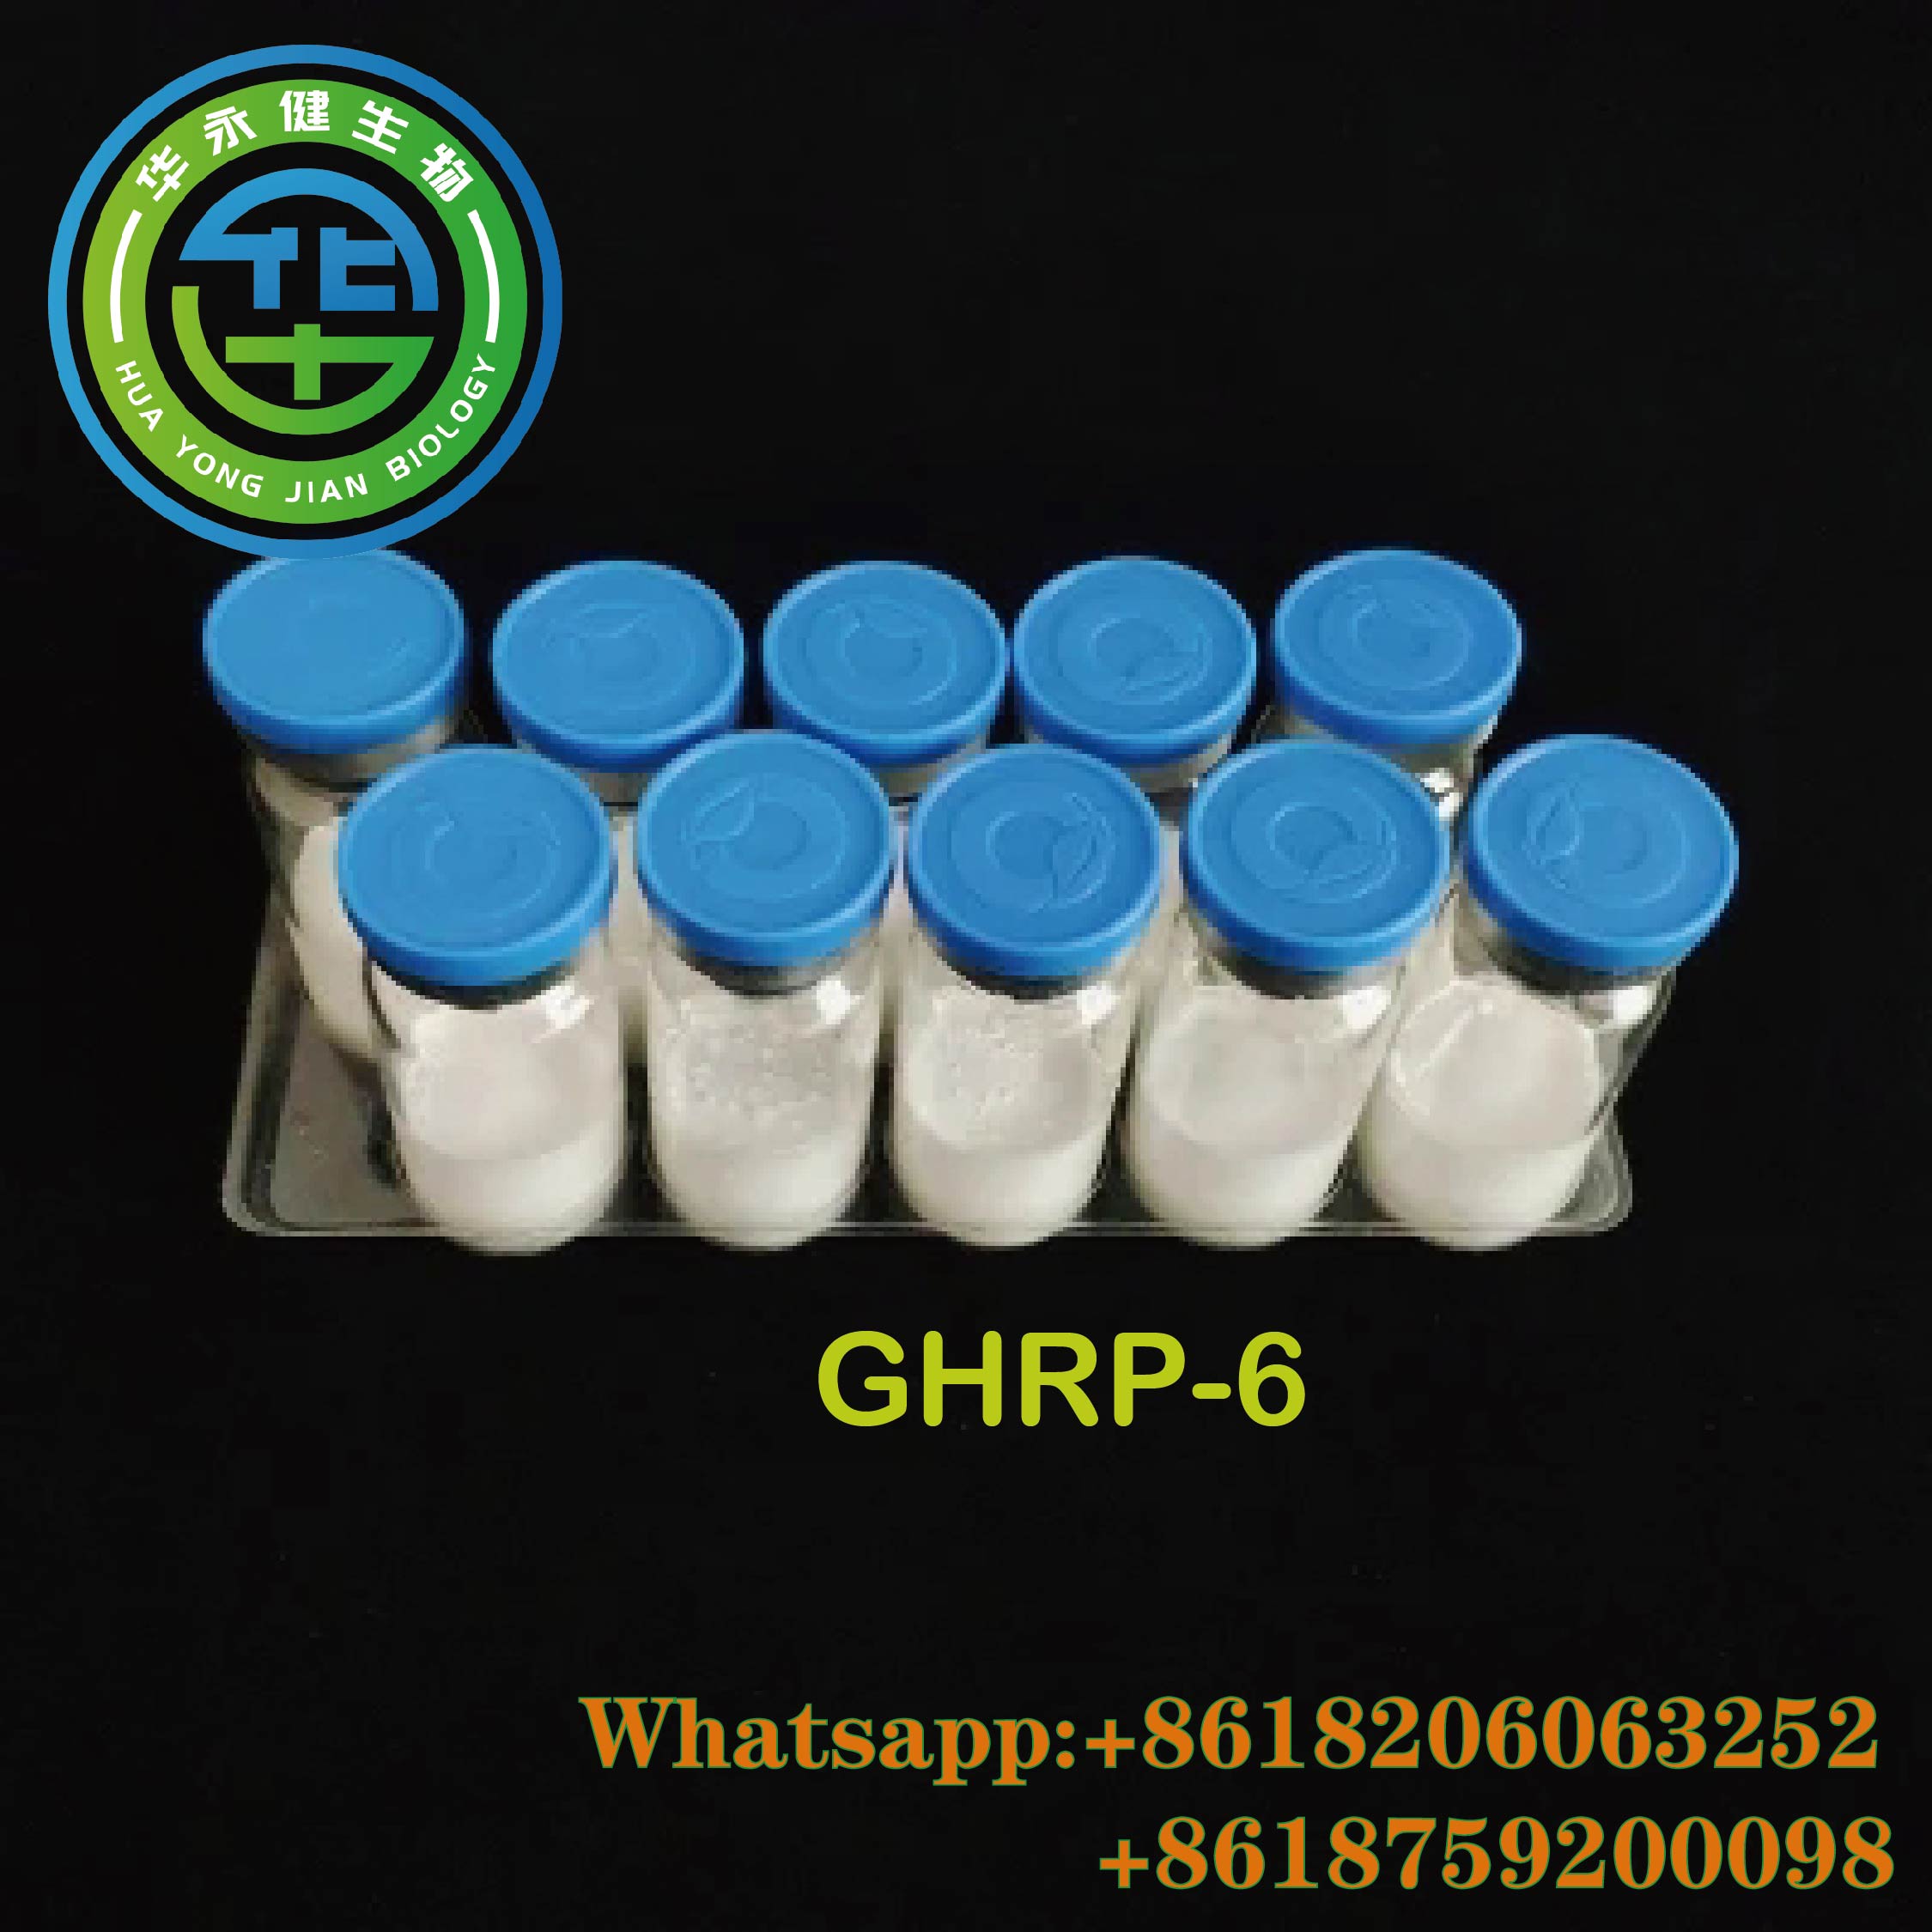 Top Quality Real Human Growth GHRP-2 Peptide Muscle Gain Hormones CasNO.158861-67-7